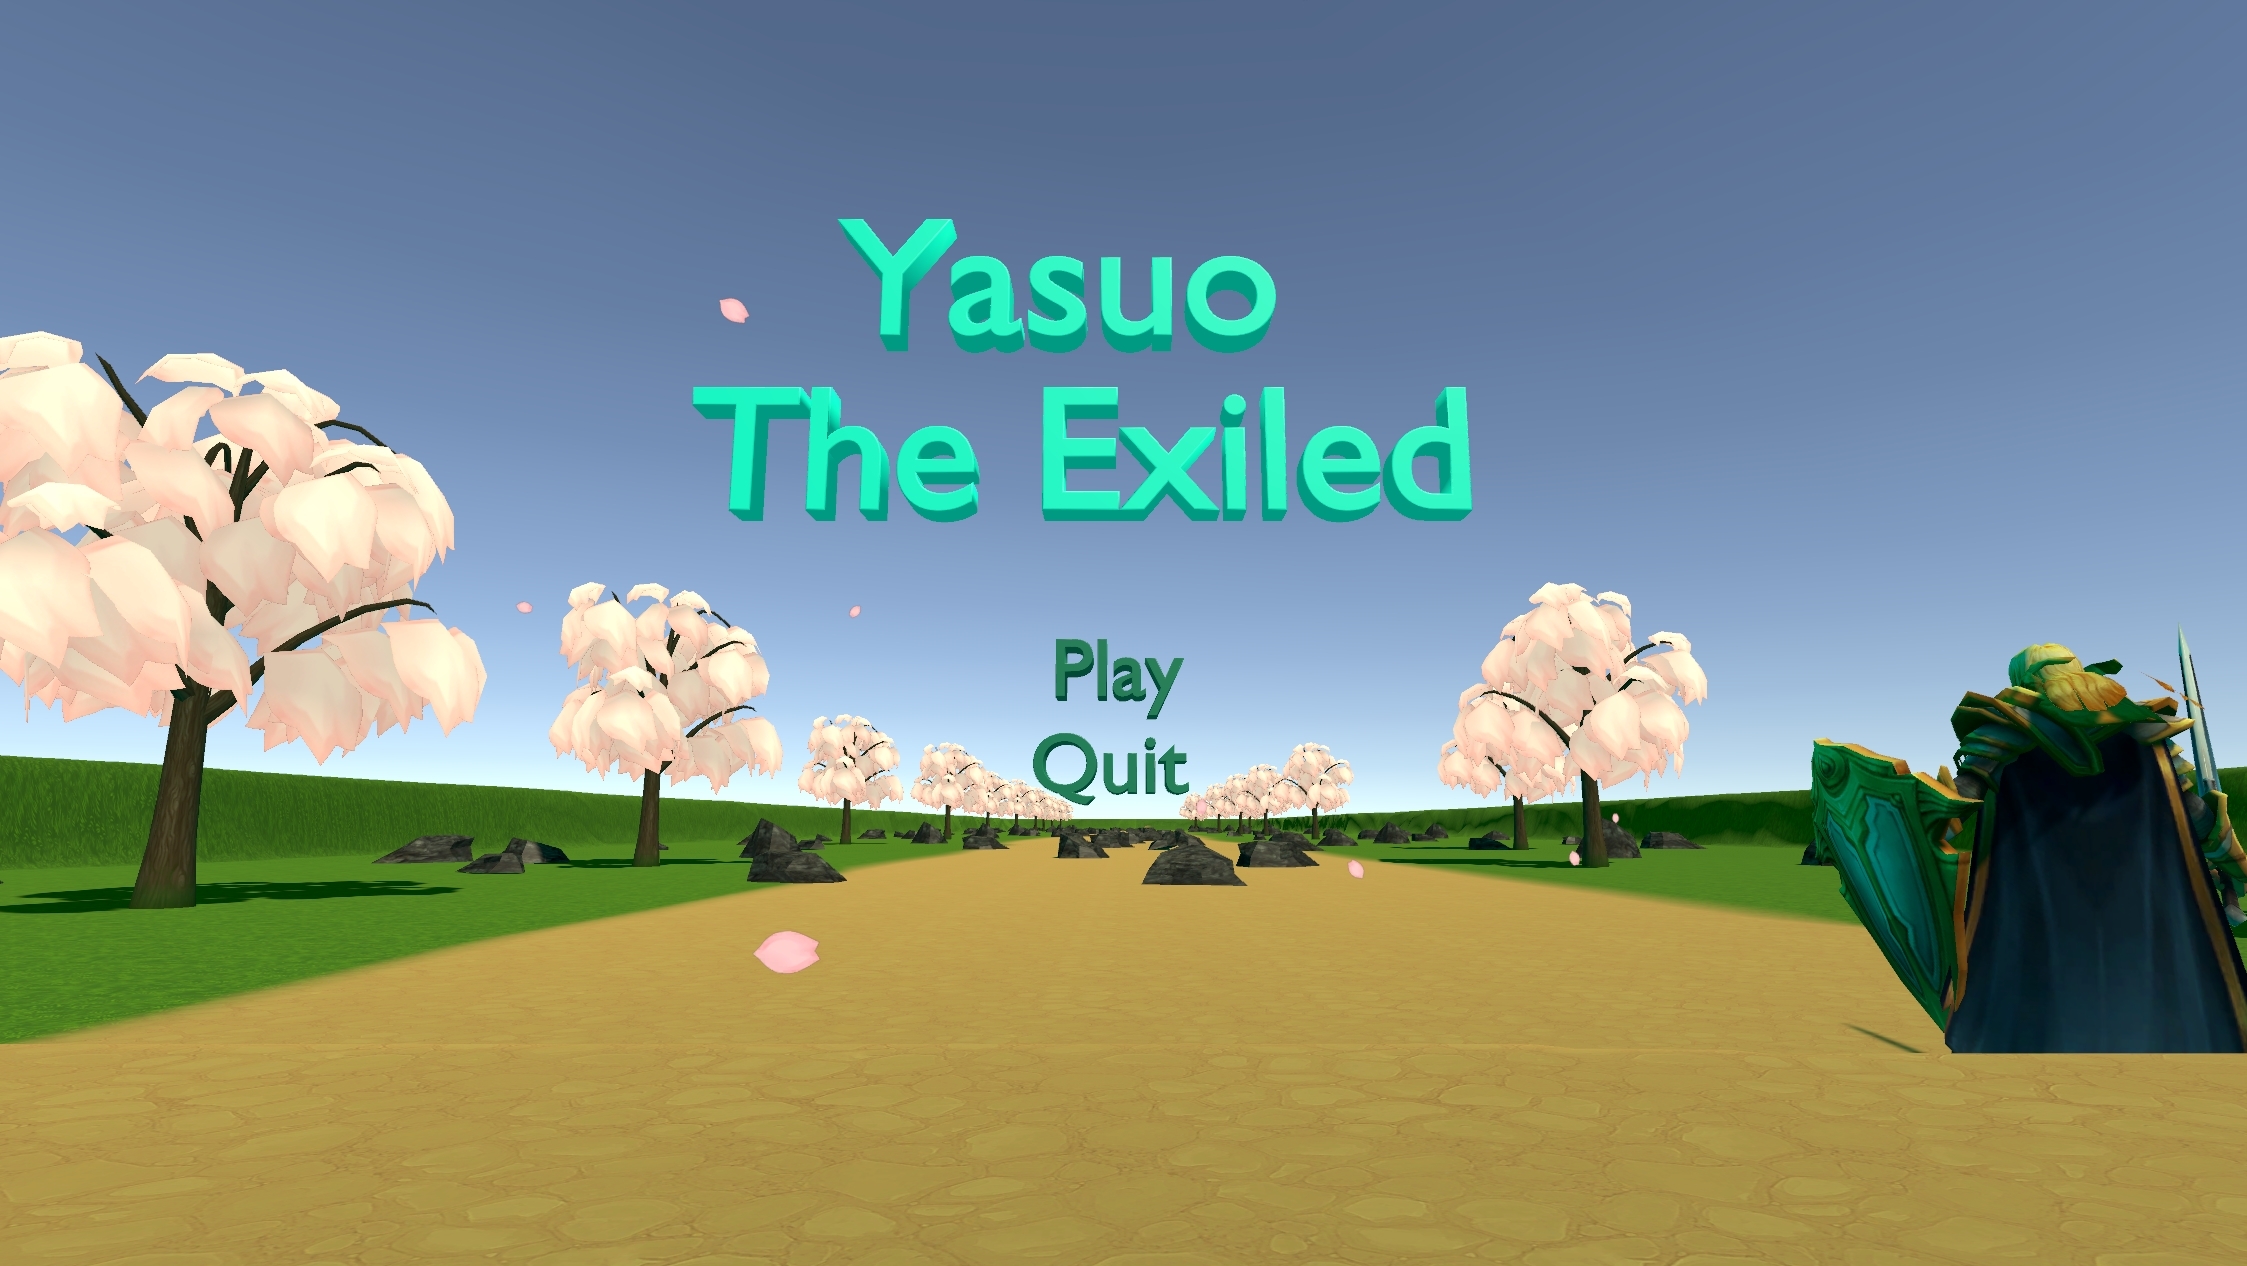 [Image of Yasuo: The Exiled]